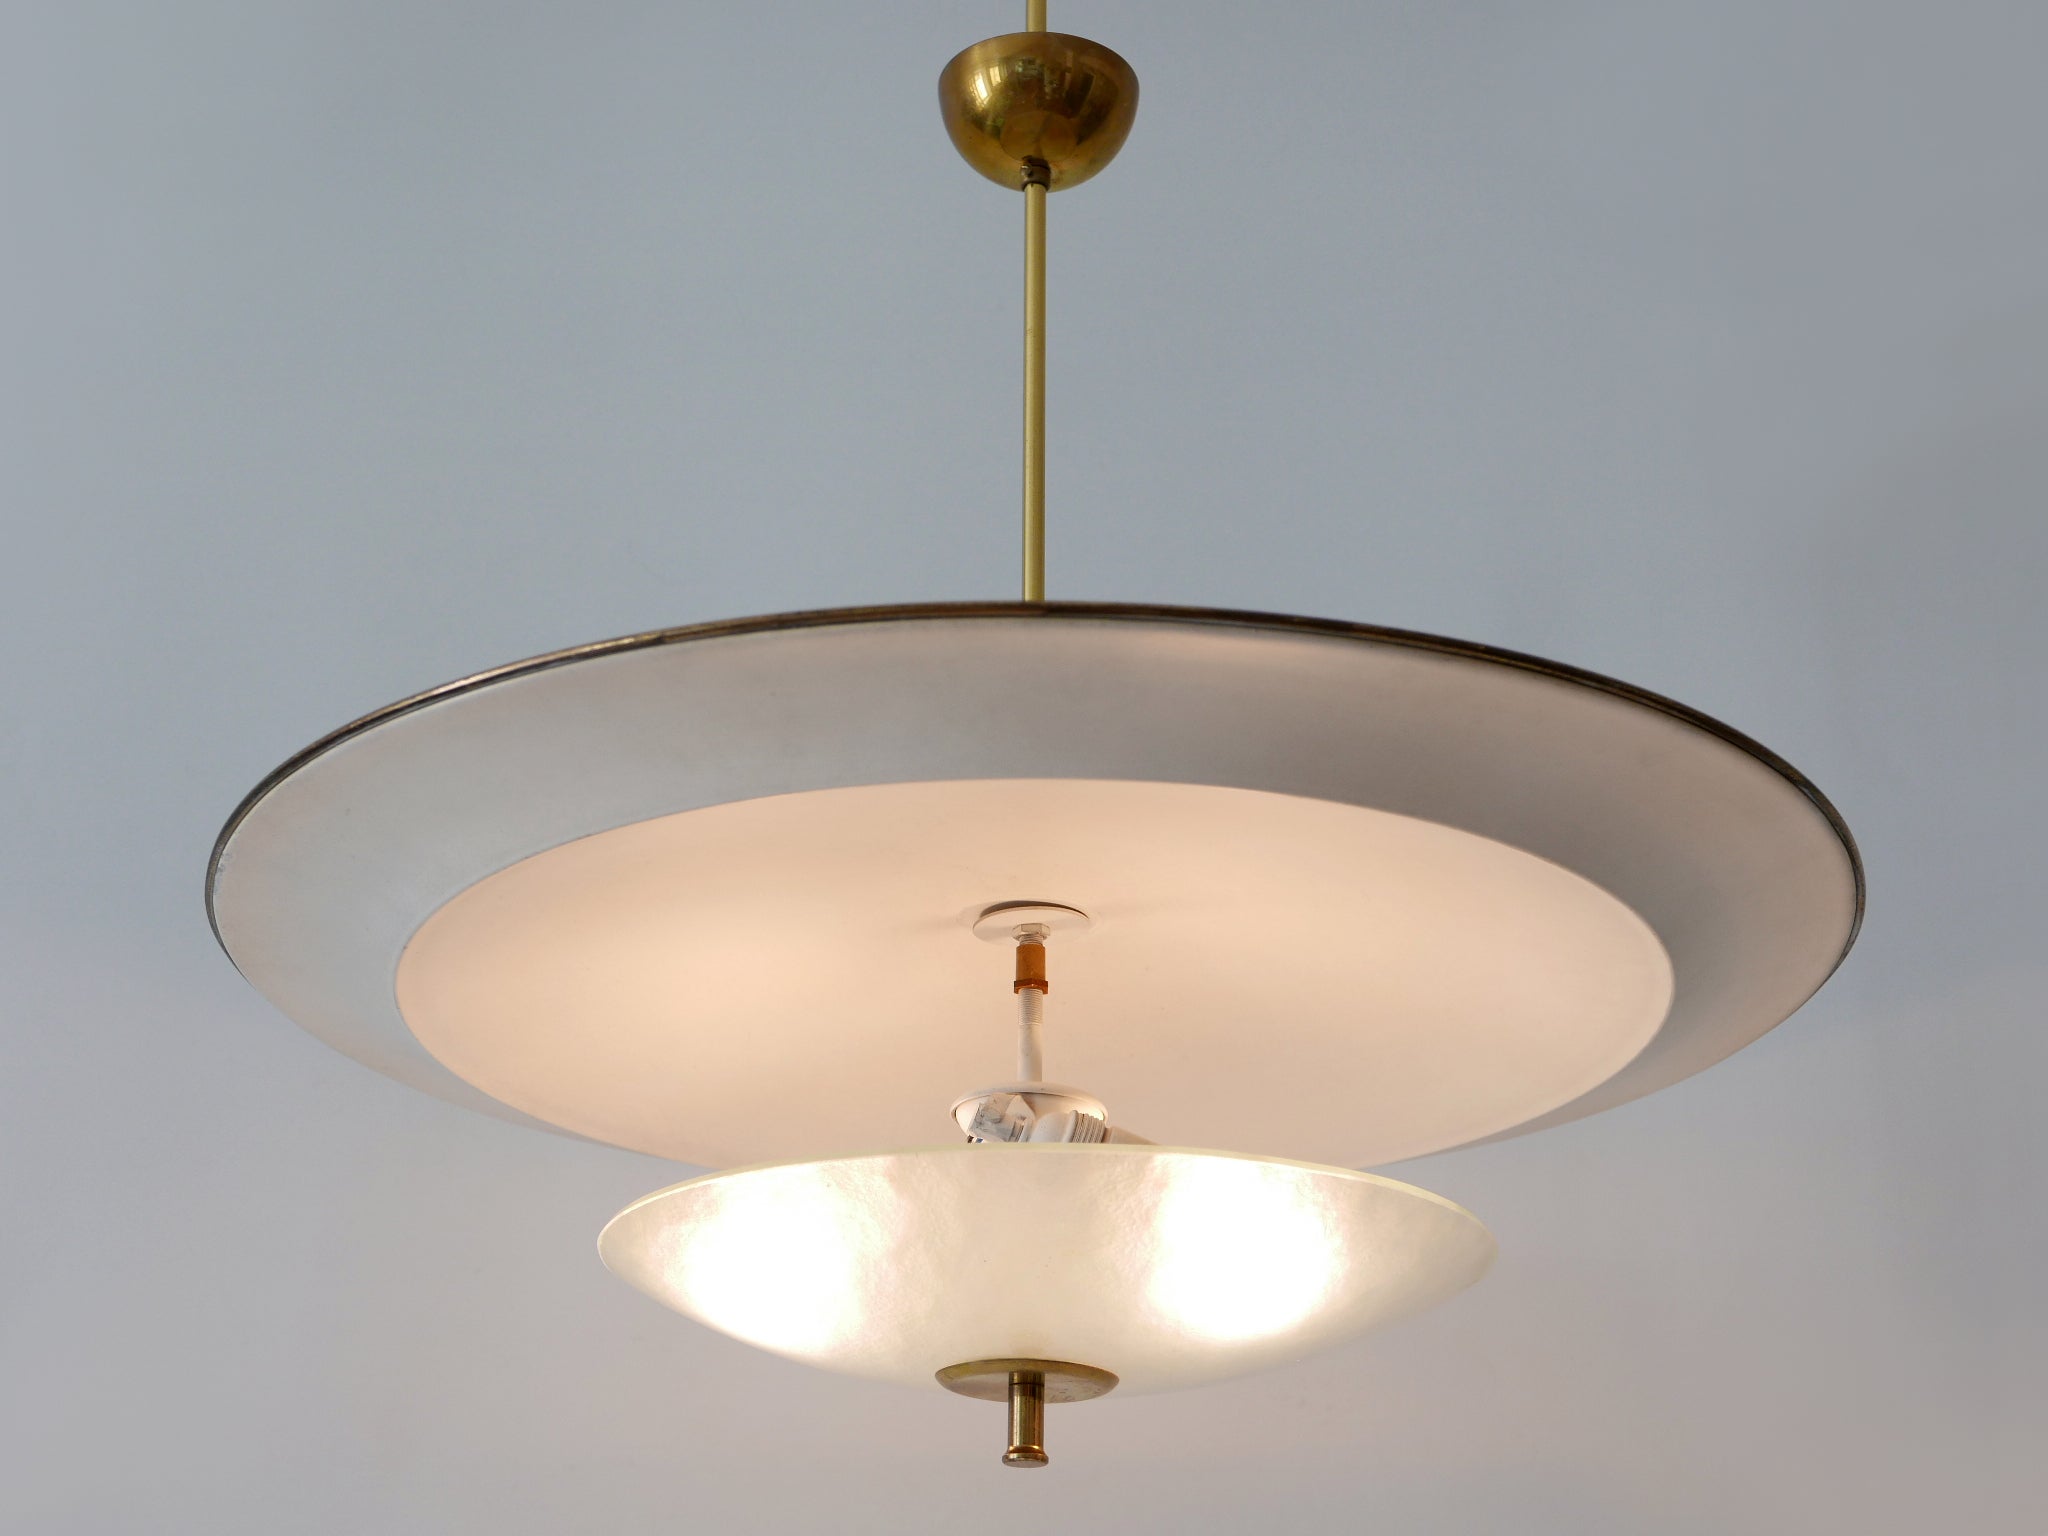 Large Mid-Century Modern 'Ufo' Ceiling Light or Pendant Lamp Germany 1950s № 3 For Sale 8